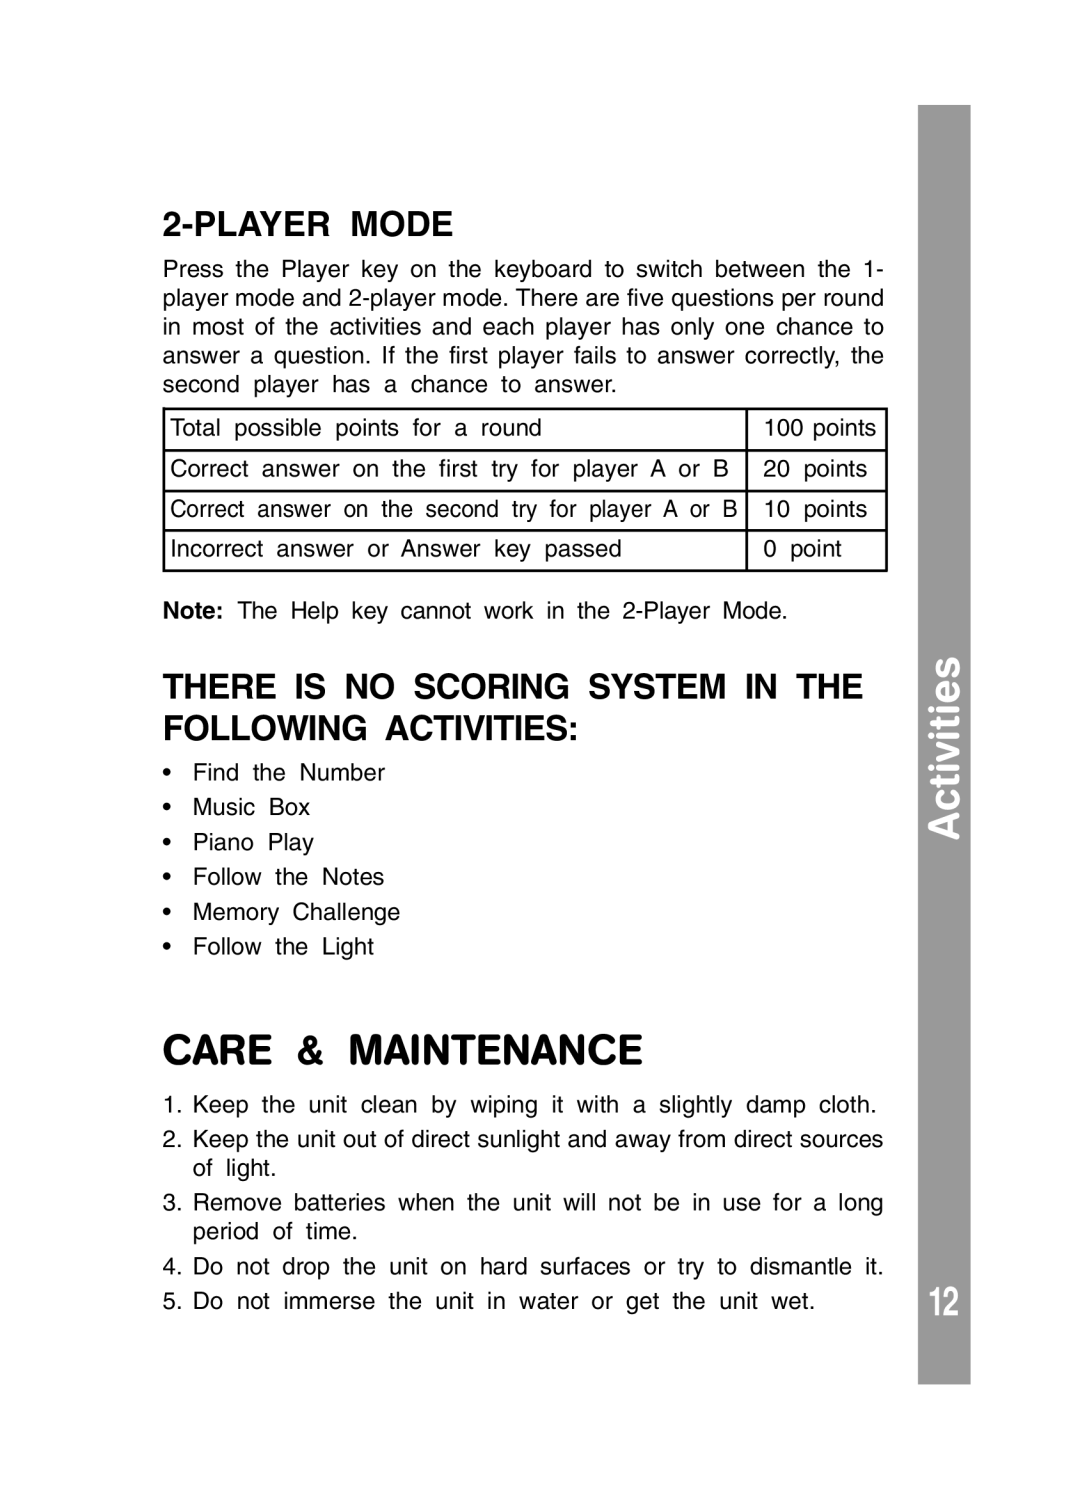 VTech 91-01256-043 user manual Care & Maintenance, Player Mode, There Is No Scoring System In The Following Activities 